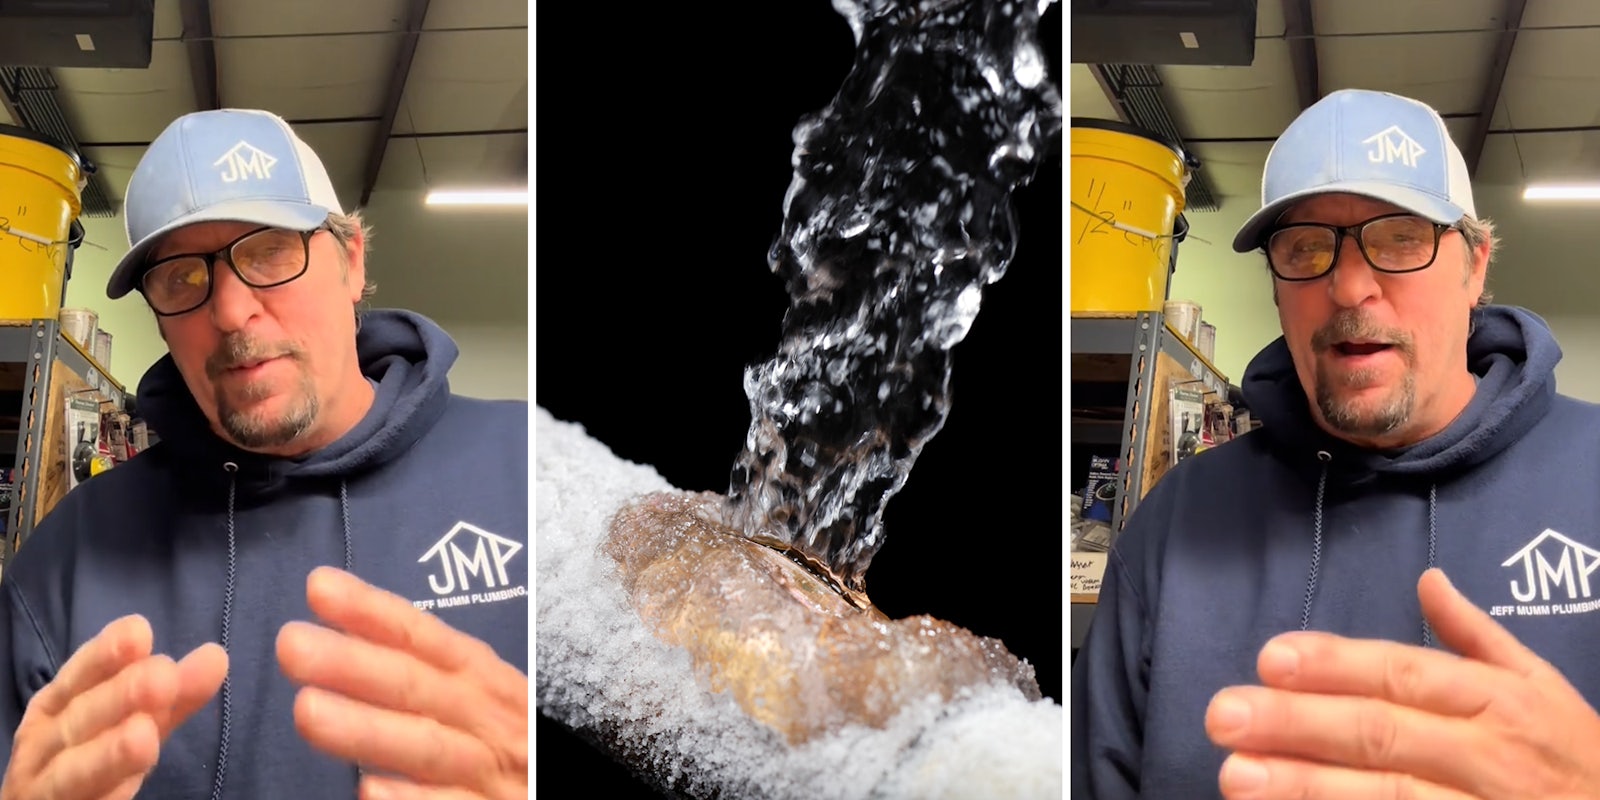 Plumber shows how to prepare for cold weather and avoid frozen pipes next week